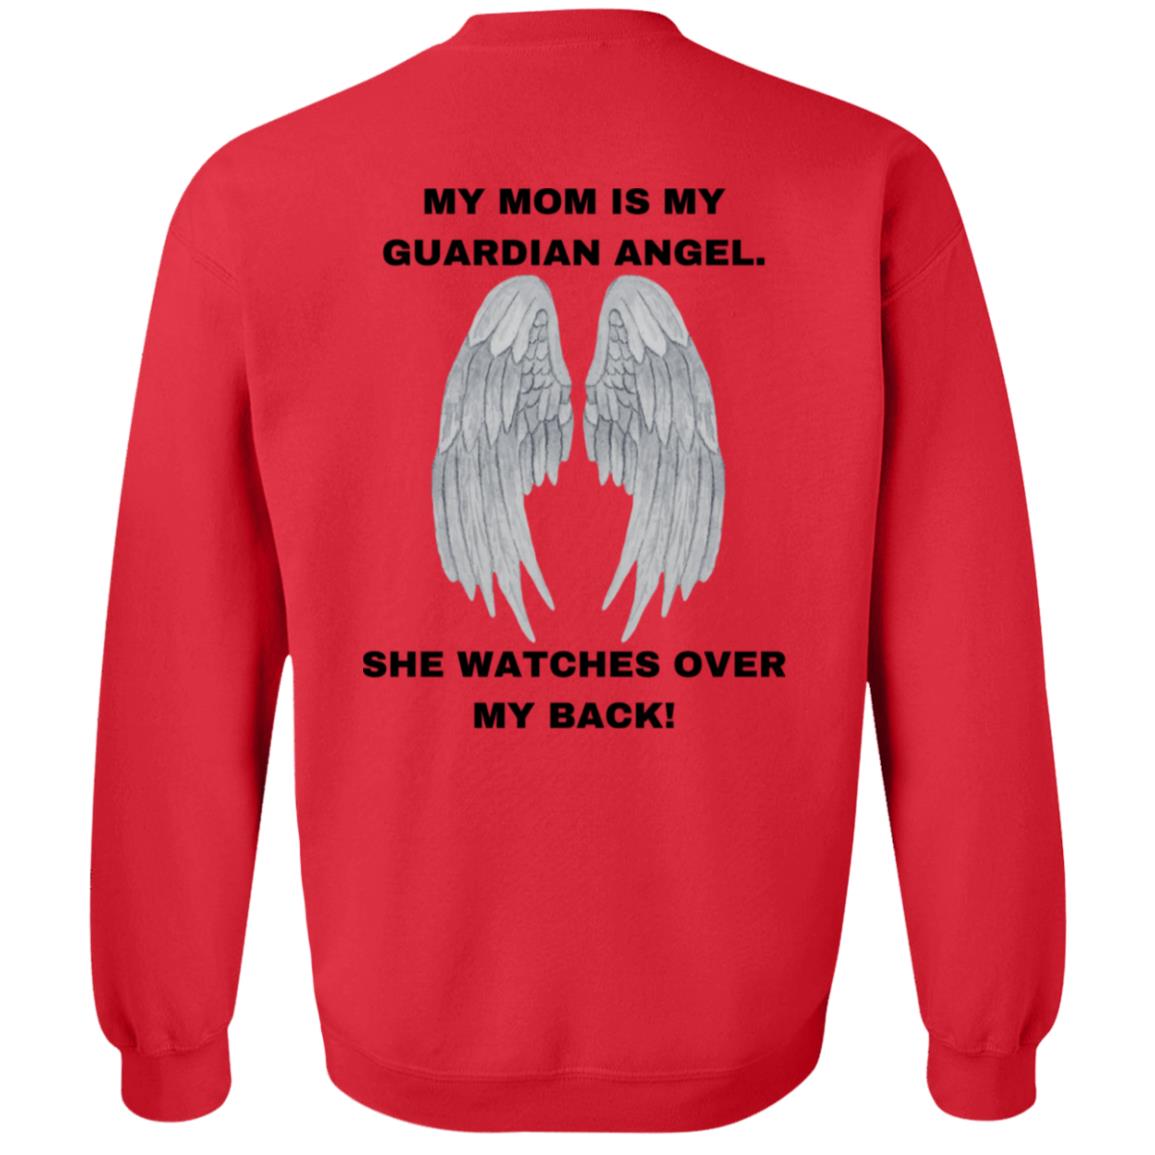 Get trendy with My Mom is MY Guardian Angel Black text (10) G180 Crewneck Pullover Sweatshirt - Sweatshirts available at Good Gift Company. Grab yours for $29.88 today!